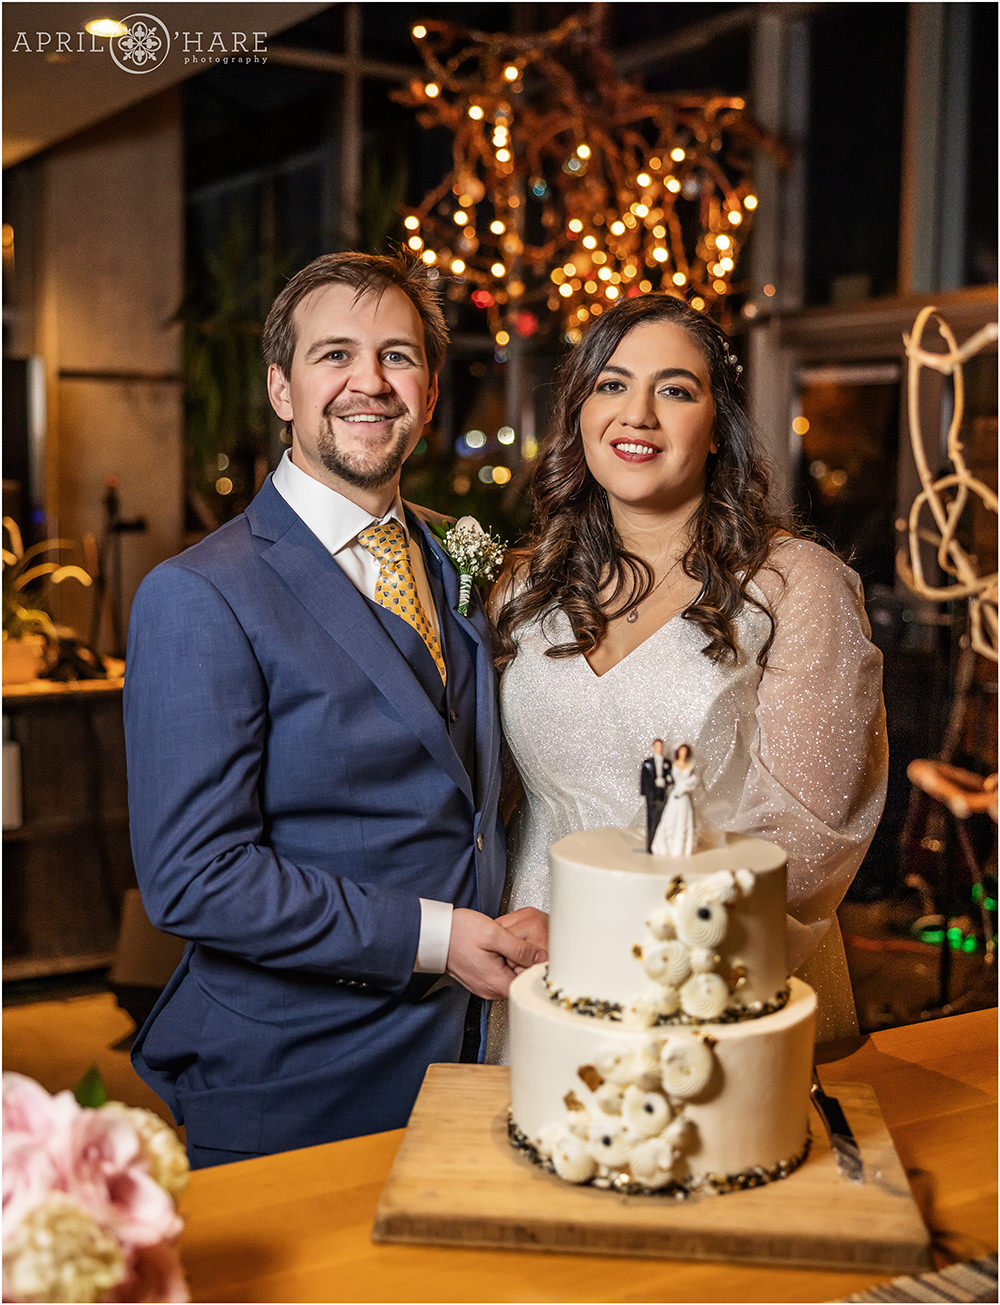 Bride and groom with their cute white wedding cake with a vintage cake topper on it